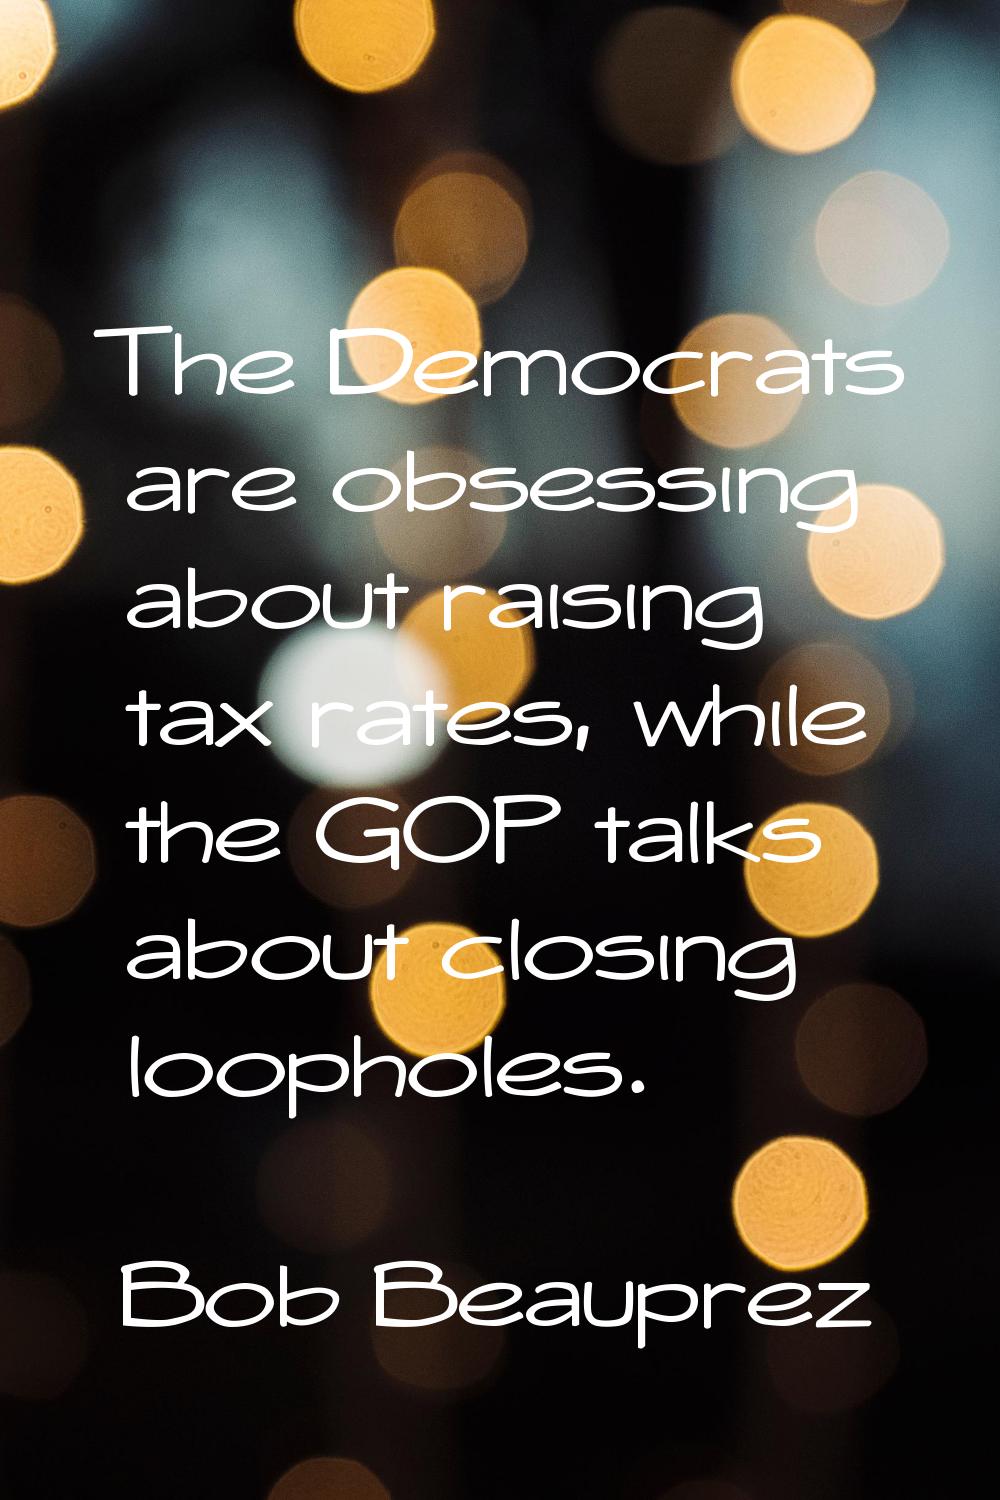 The Democrats are obsessing about raising tax rates, while the GOP talks about closing loopholes.